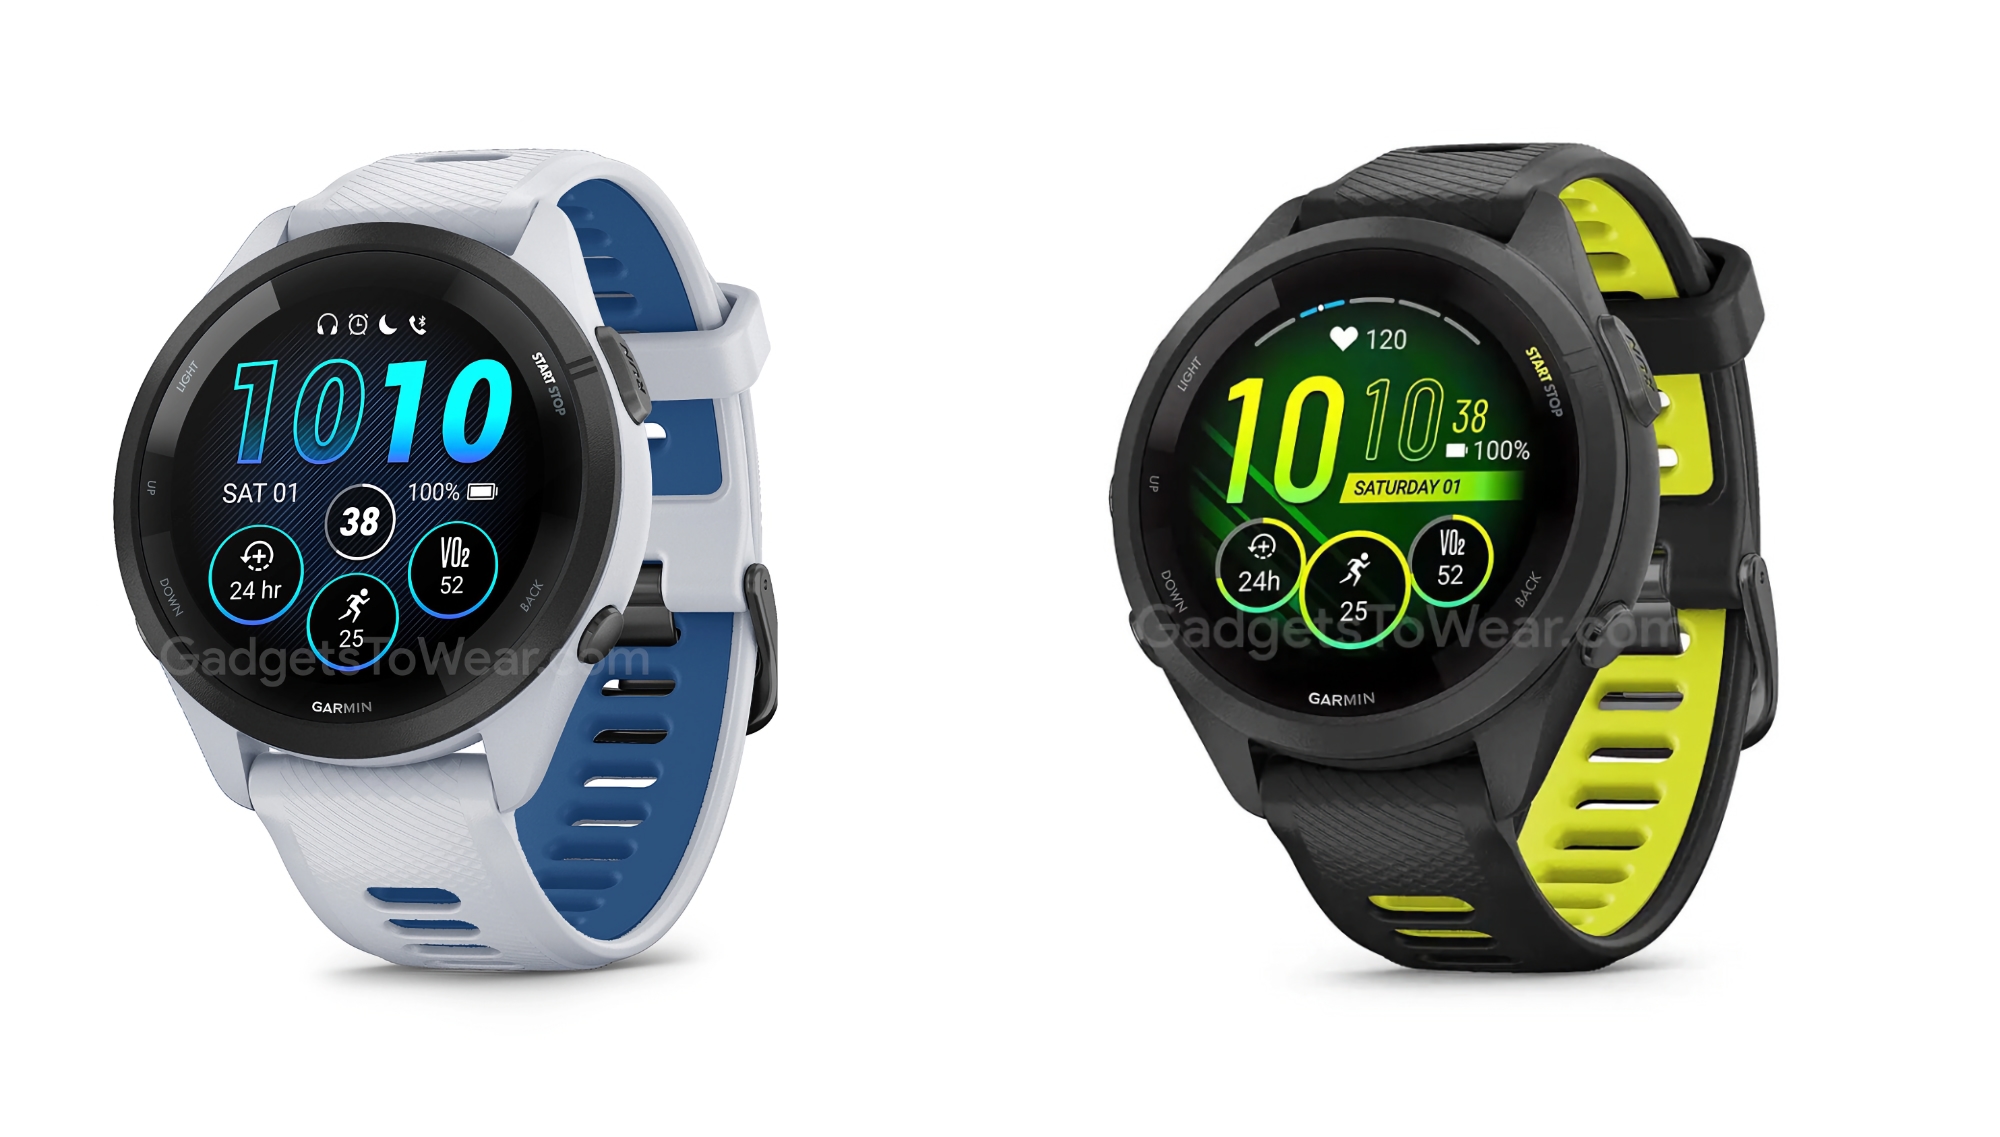 Garmin launches Forerunner 265 and Forerunner 265s sporty smartwatches with AMOLED displays and up to 13 days battery life